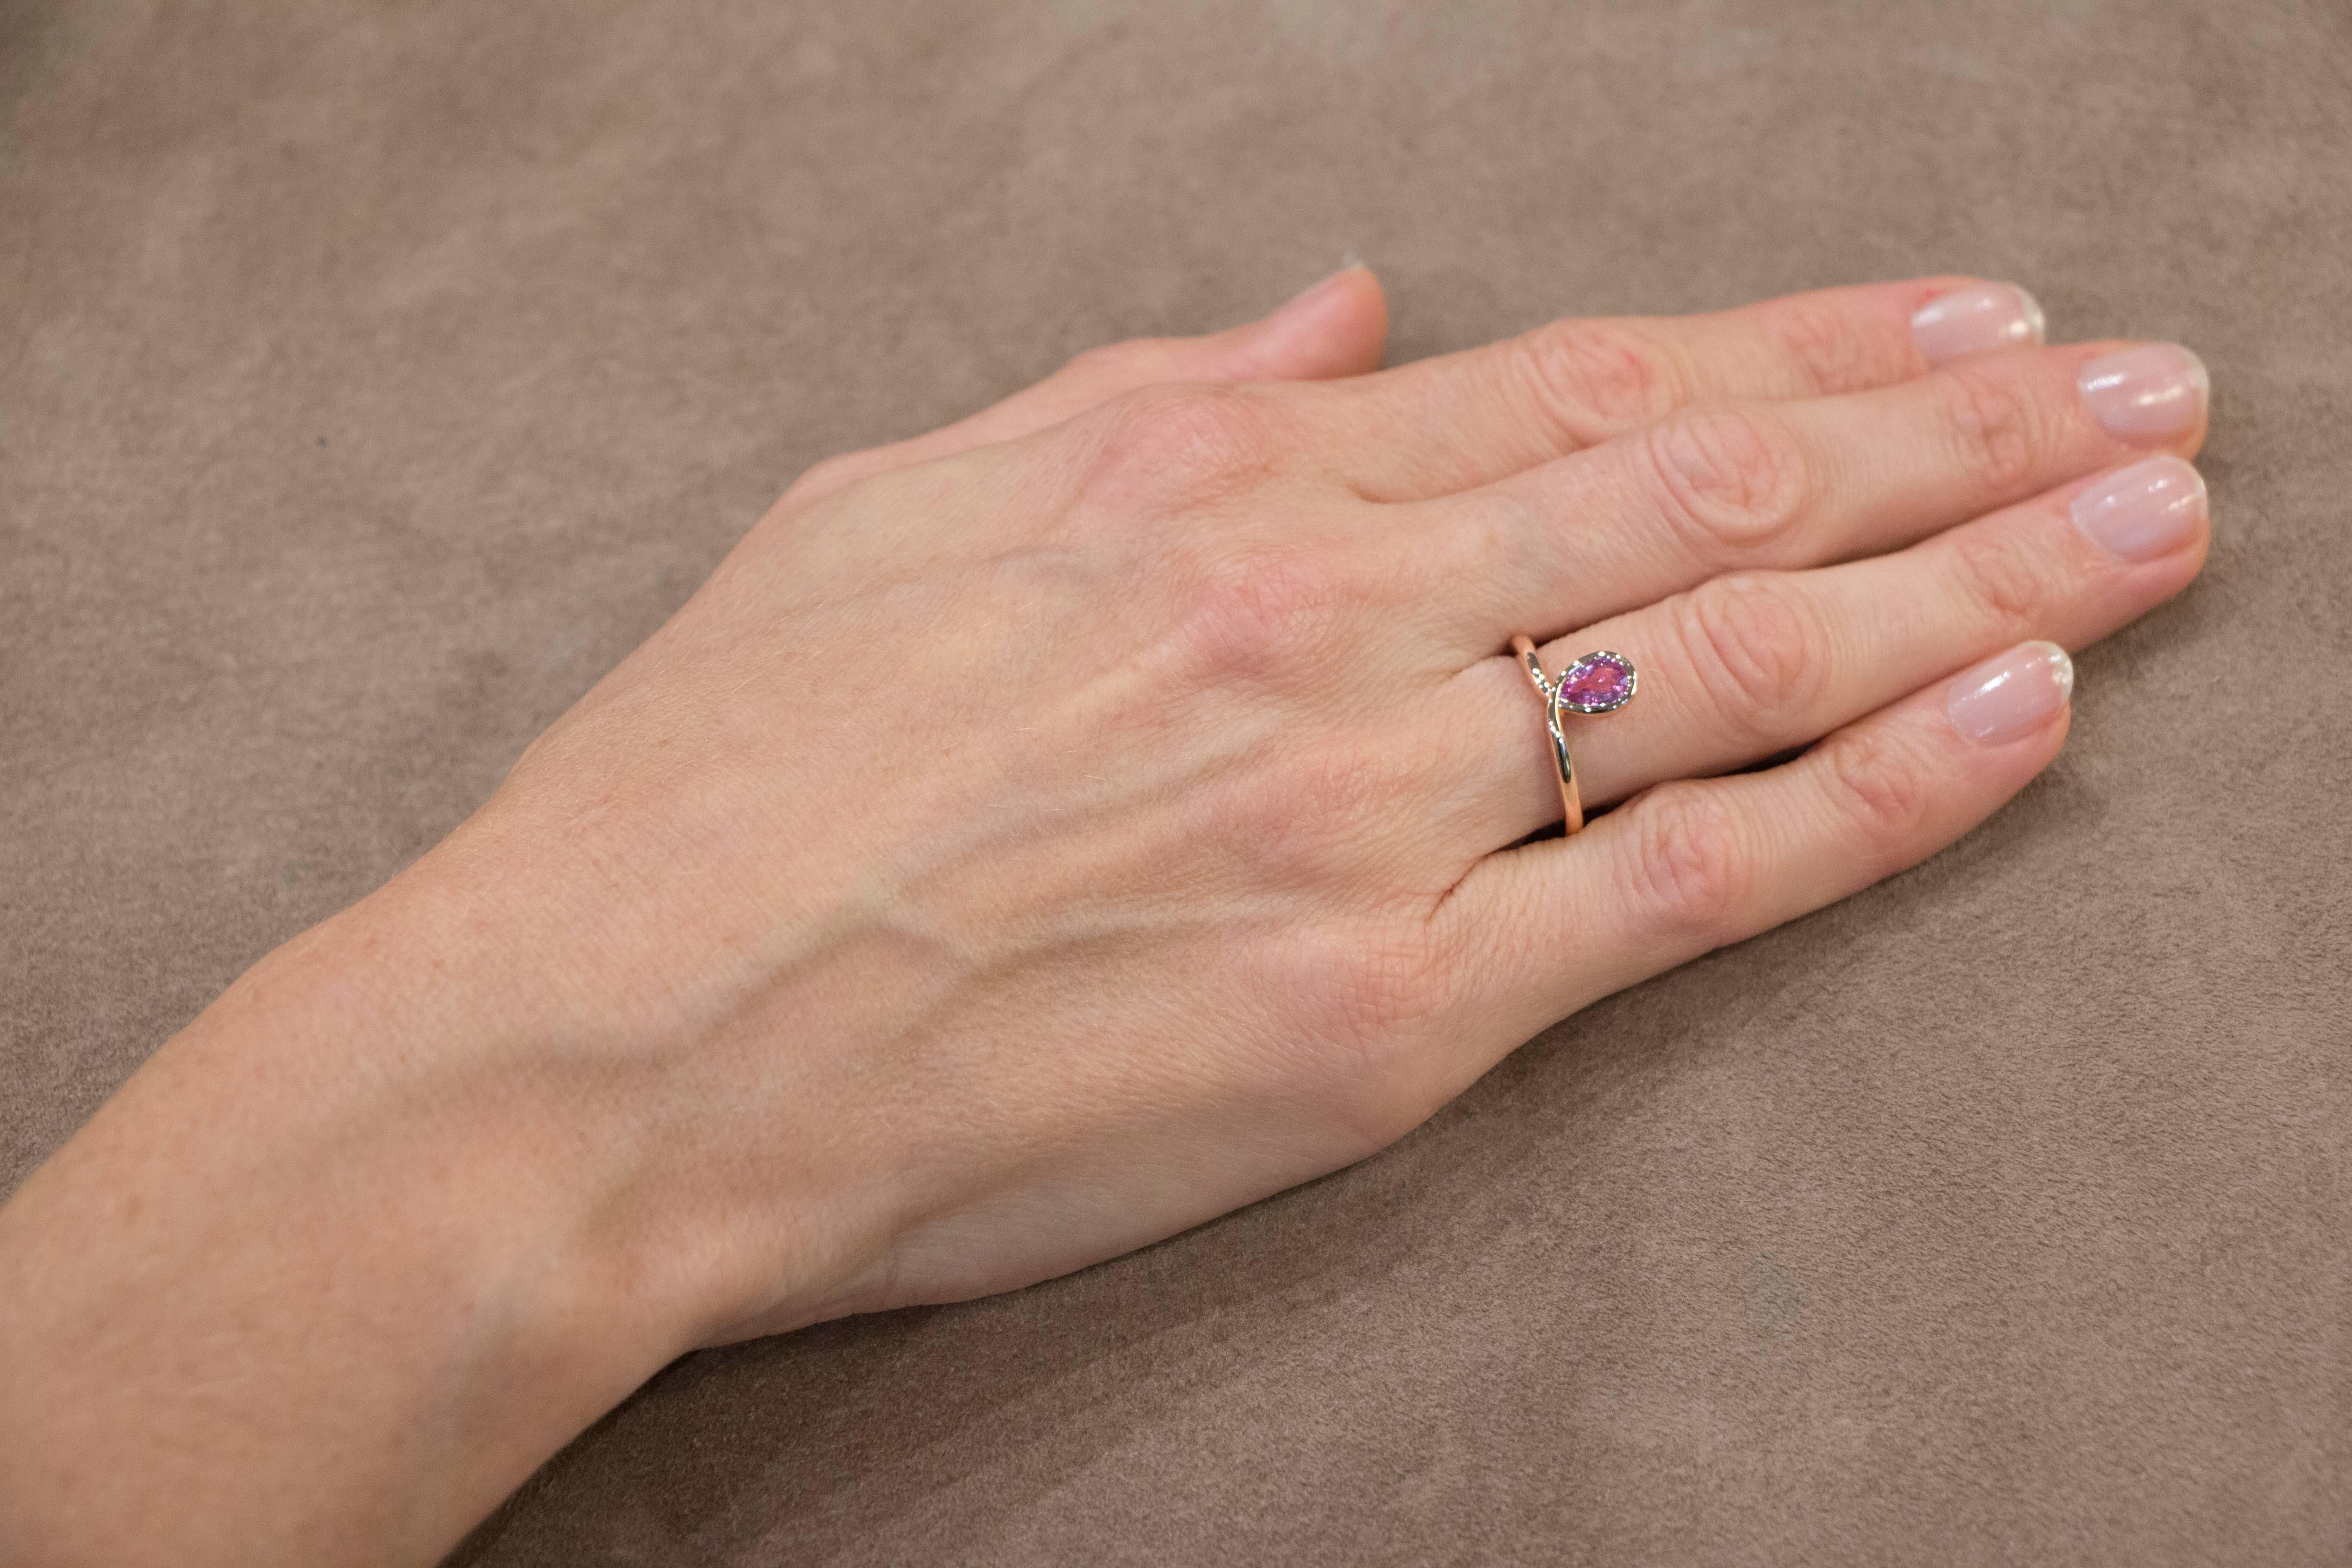 Jona design collection, hand crafted in Italy, 18 karat rose gold solitaire ring, centering a pear-shaped pink sapphire weighing 0.8 carats. Signed Jona. US size: 6 / EU size: 12 (can be sized to any specification).
Dimensions:
0.82 in. H x 0.81 in.